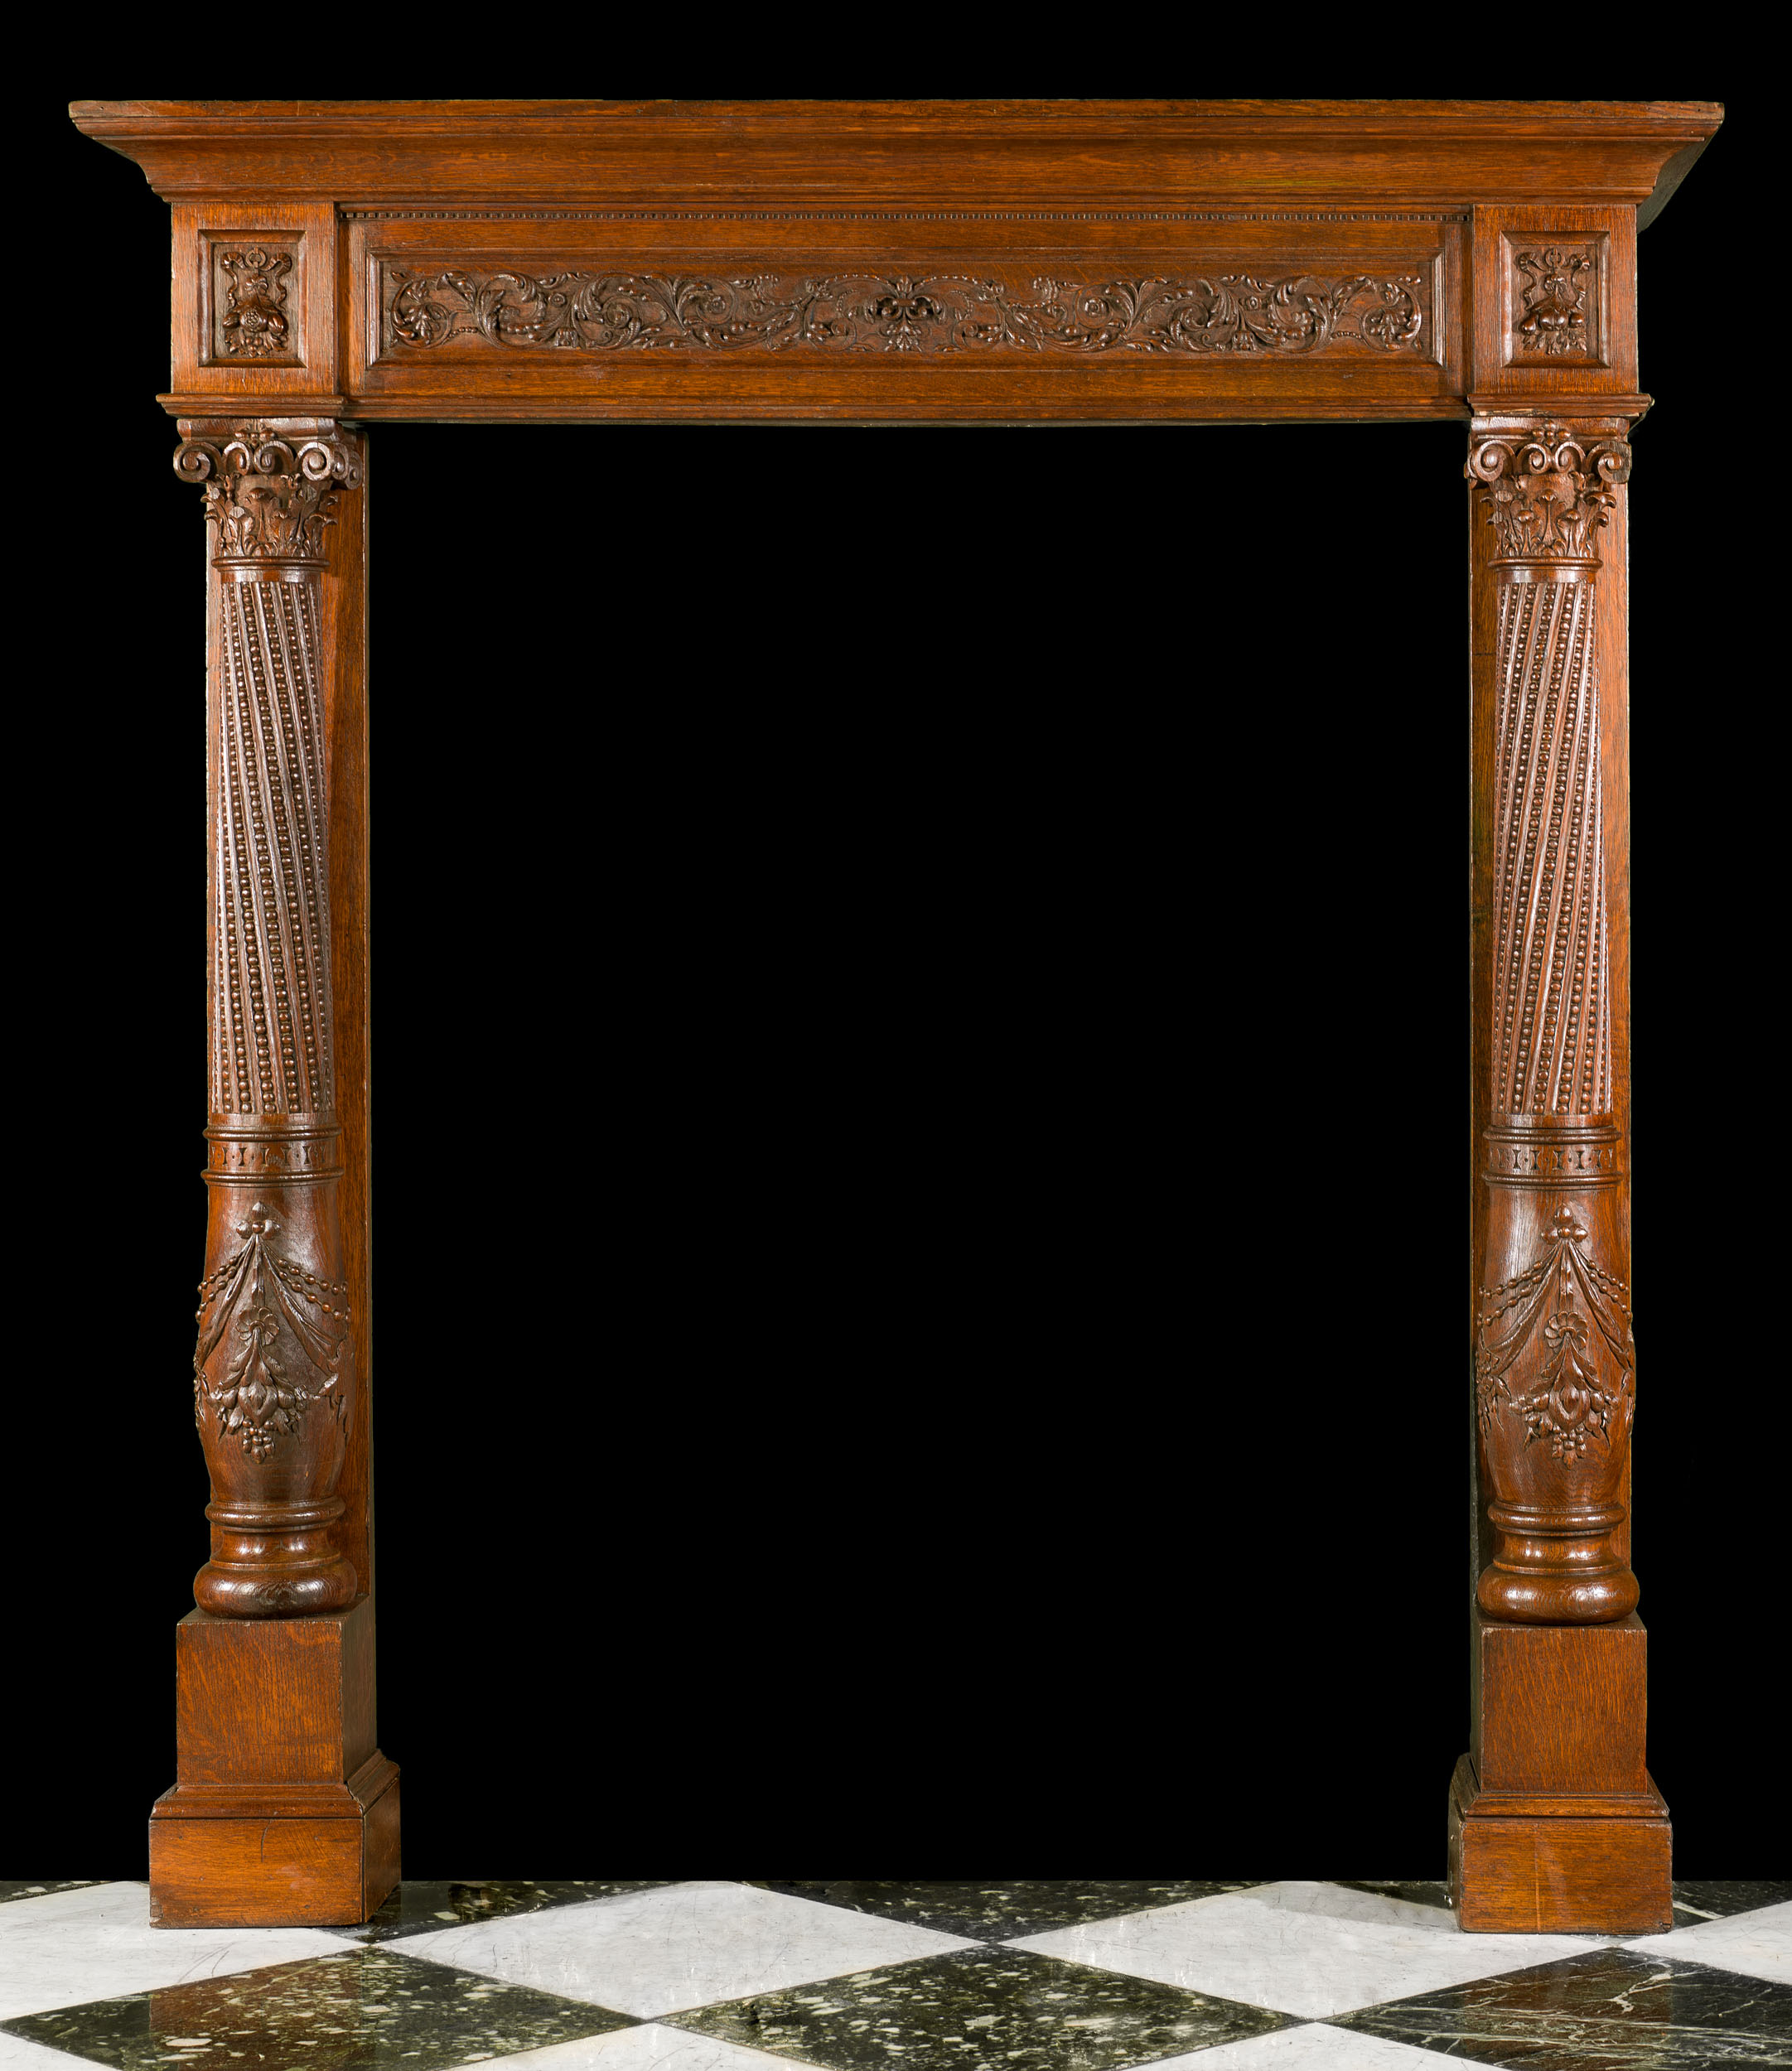 A Tall French Antique Oak Fireplace Mantel